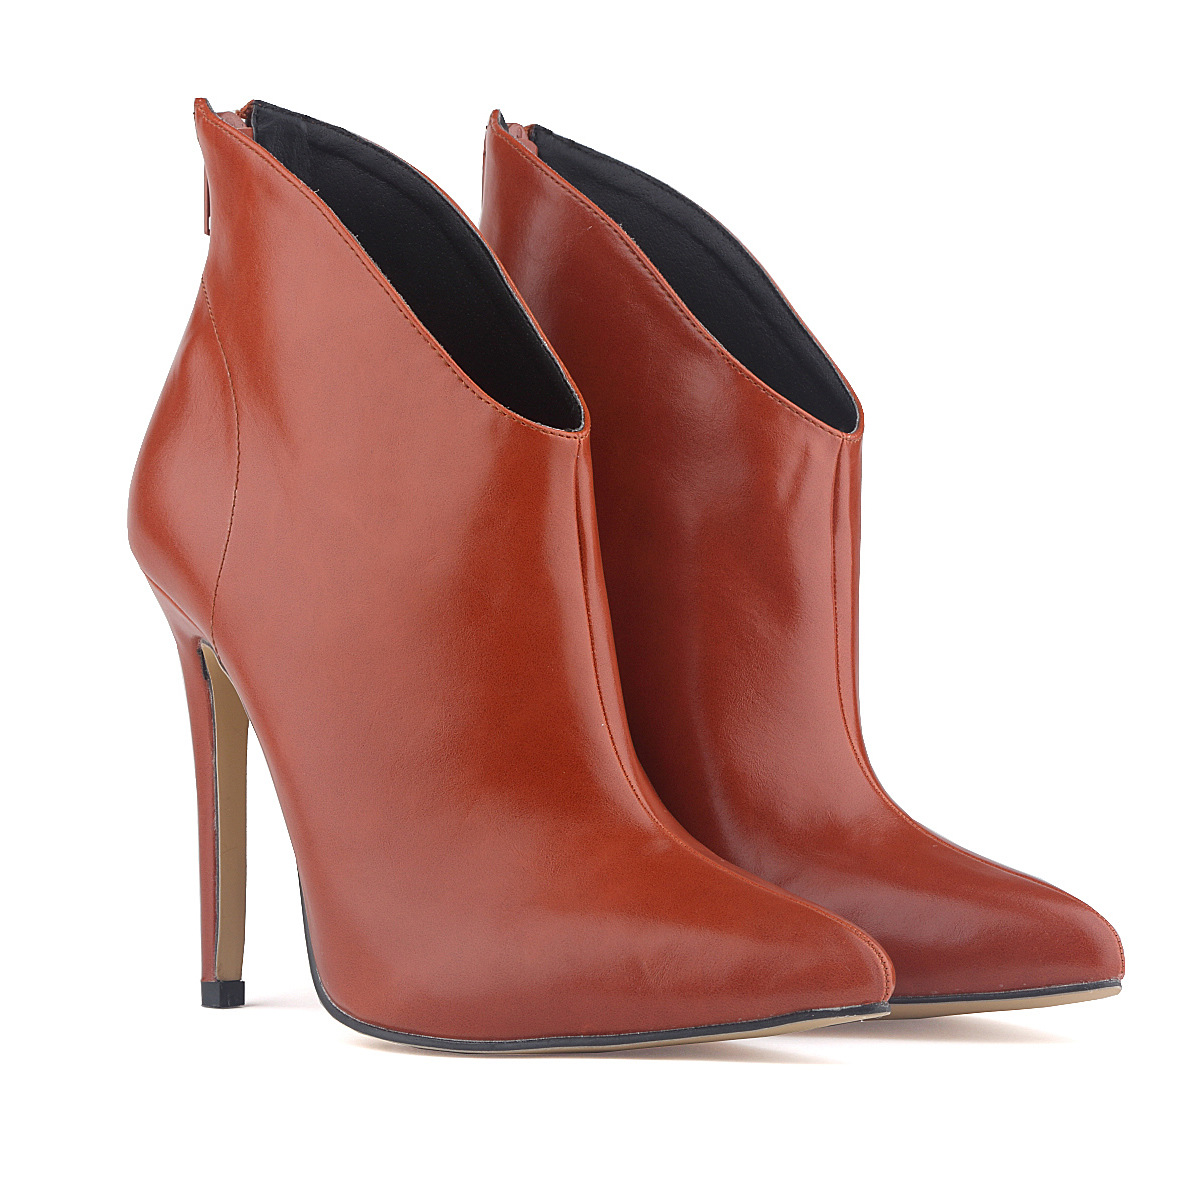 Patent Leather Pointed-toe High Heel Ankle Boots Featuring Back Zipper